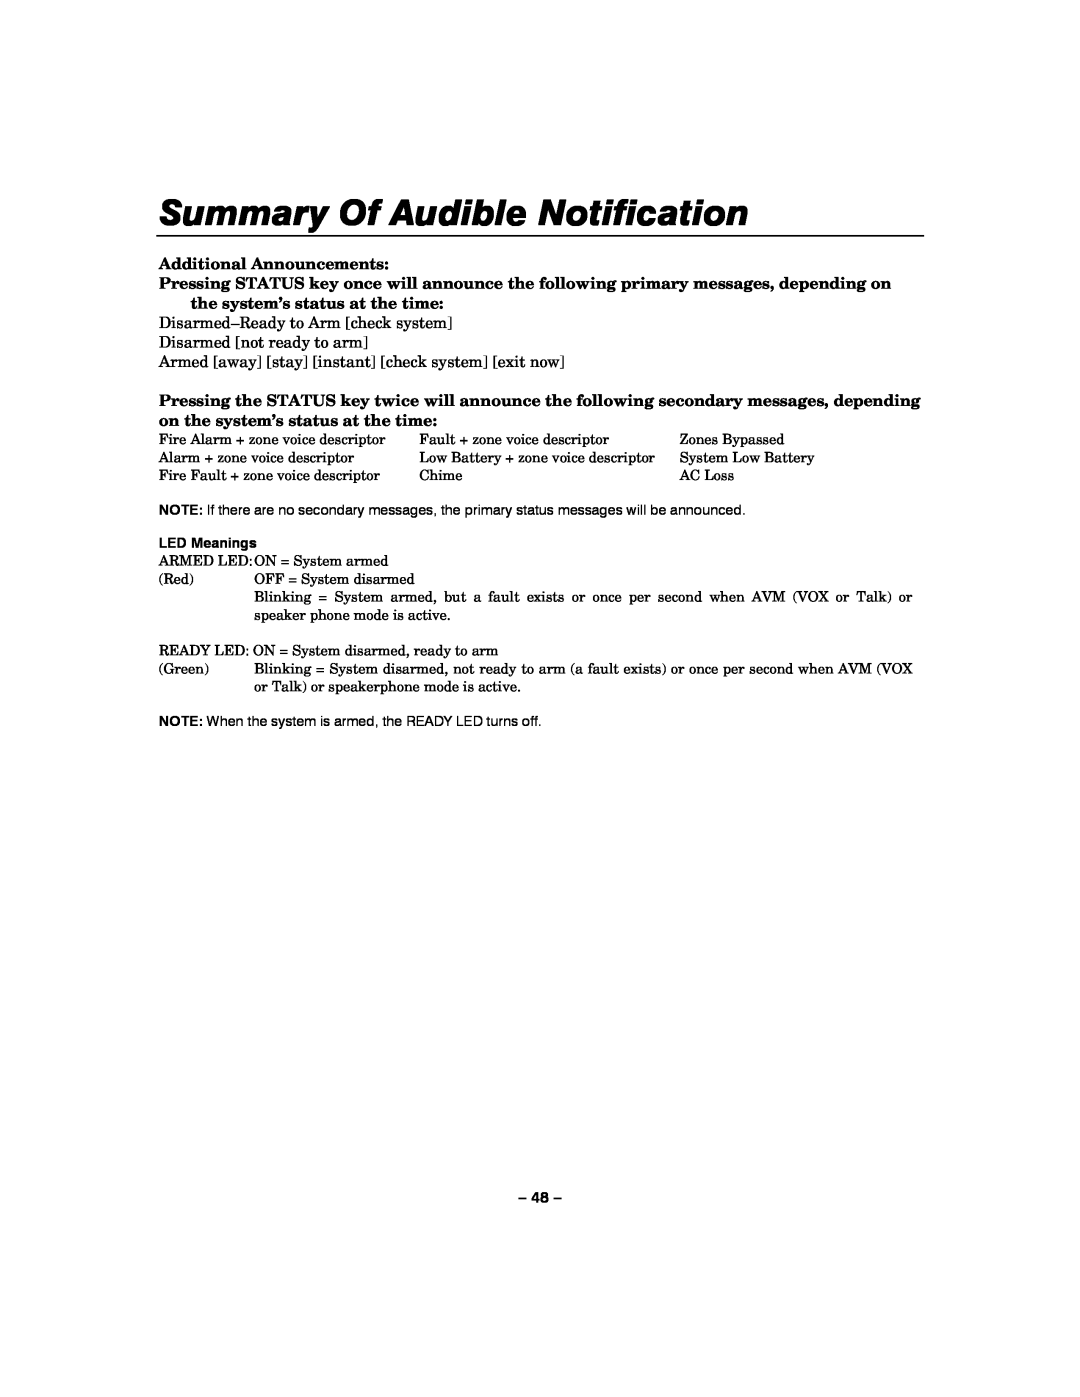 Honeywell LYNXR-I manual Additional Announcements, Summary Of Audible Notification 